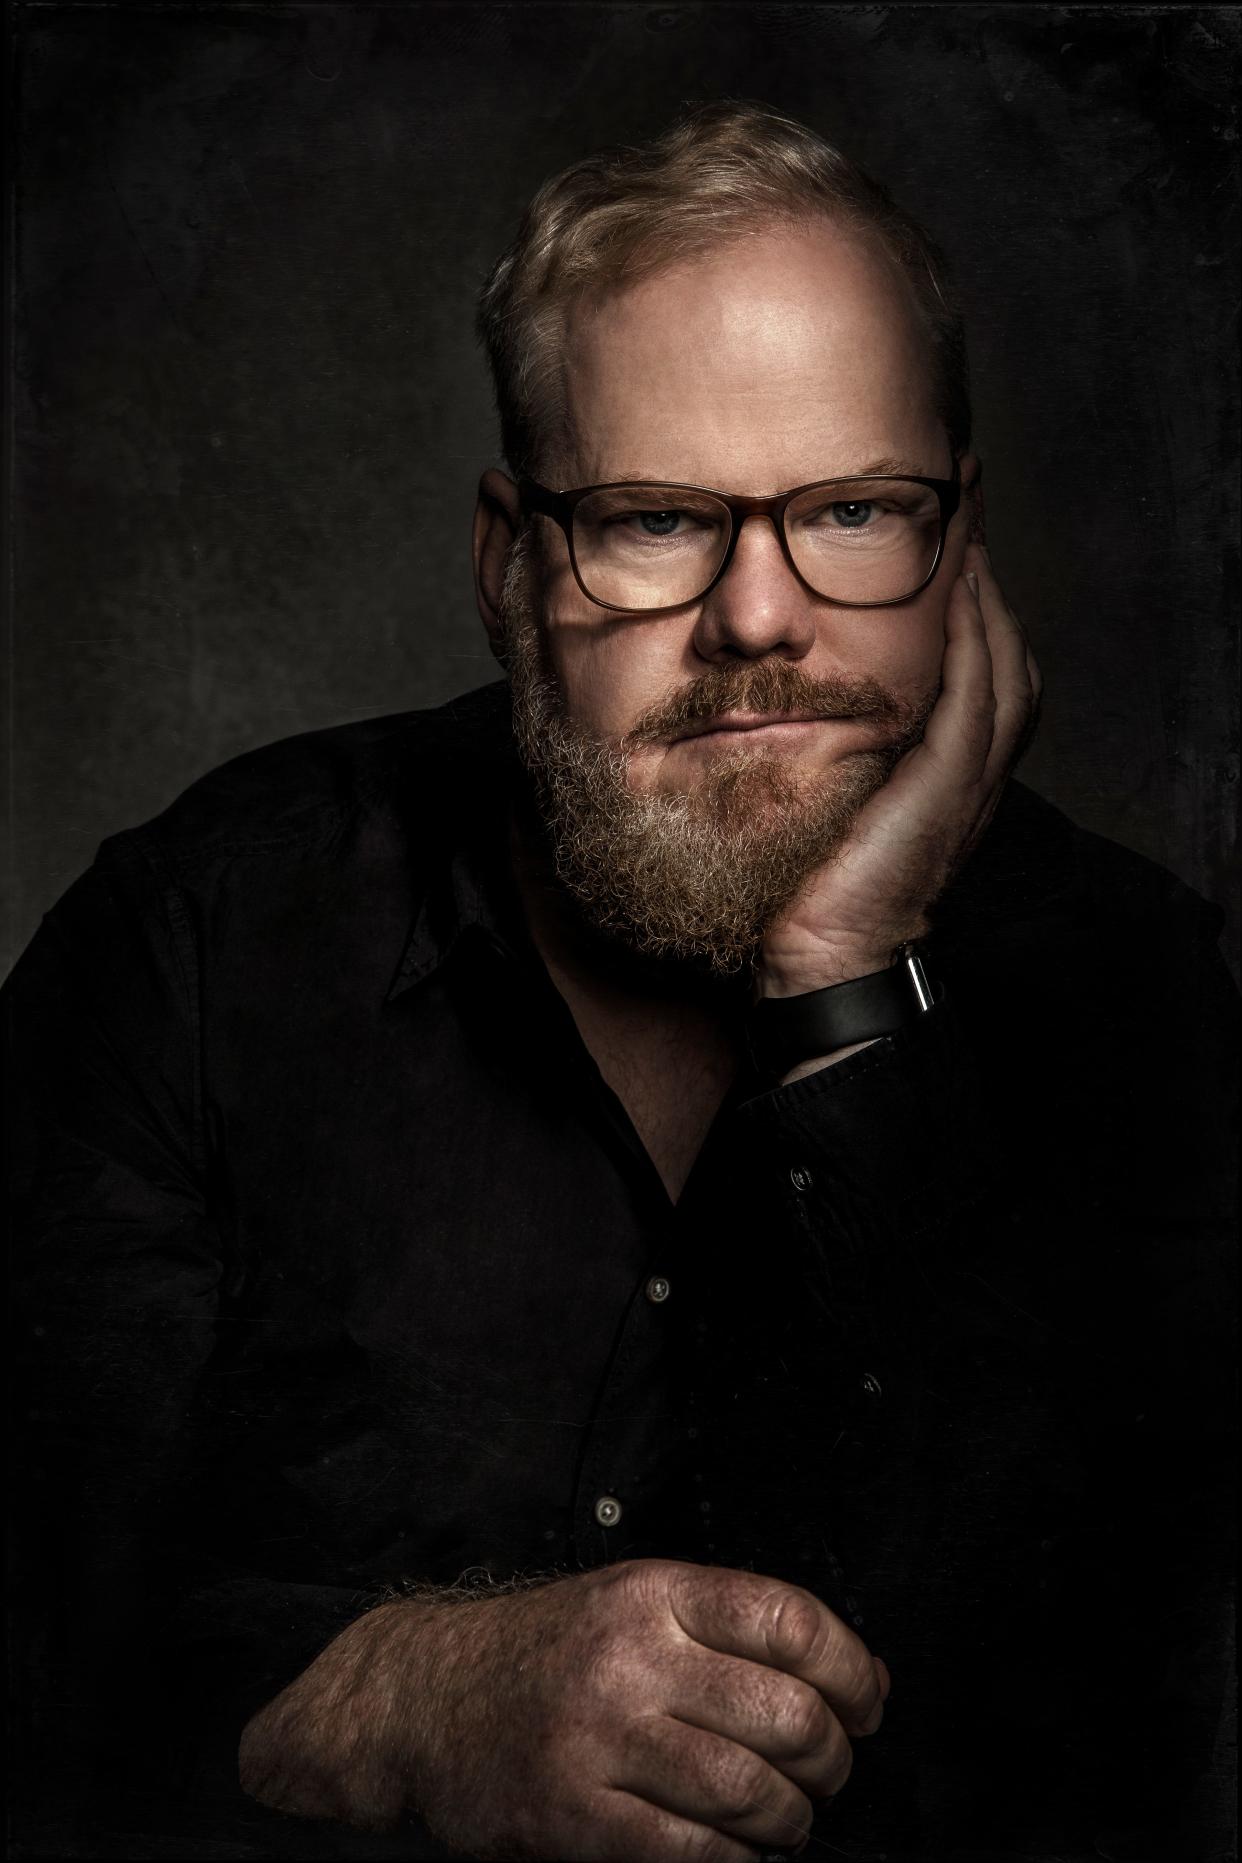 Jim Gaffigan will perform on August 5, 2022 at Agua Caliente Resort Casino Spa in Rancho Mirage, Calif., tickets are $85 to $150.